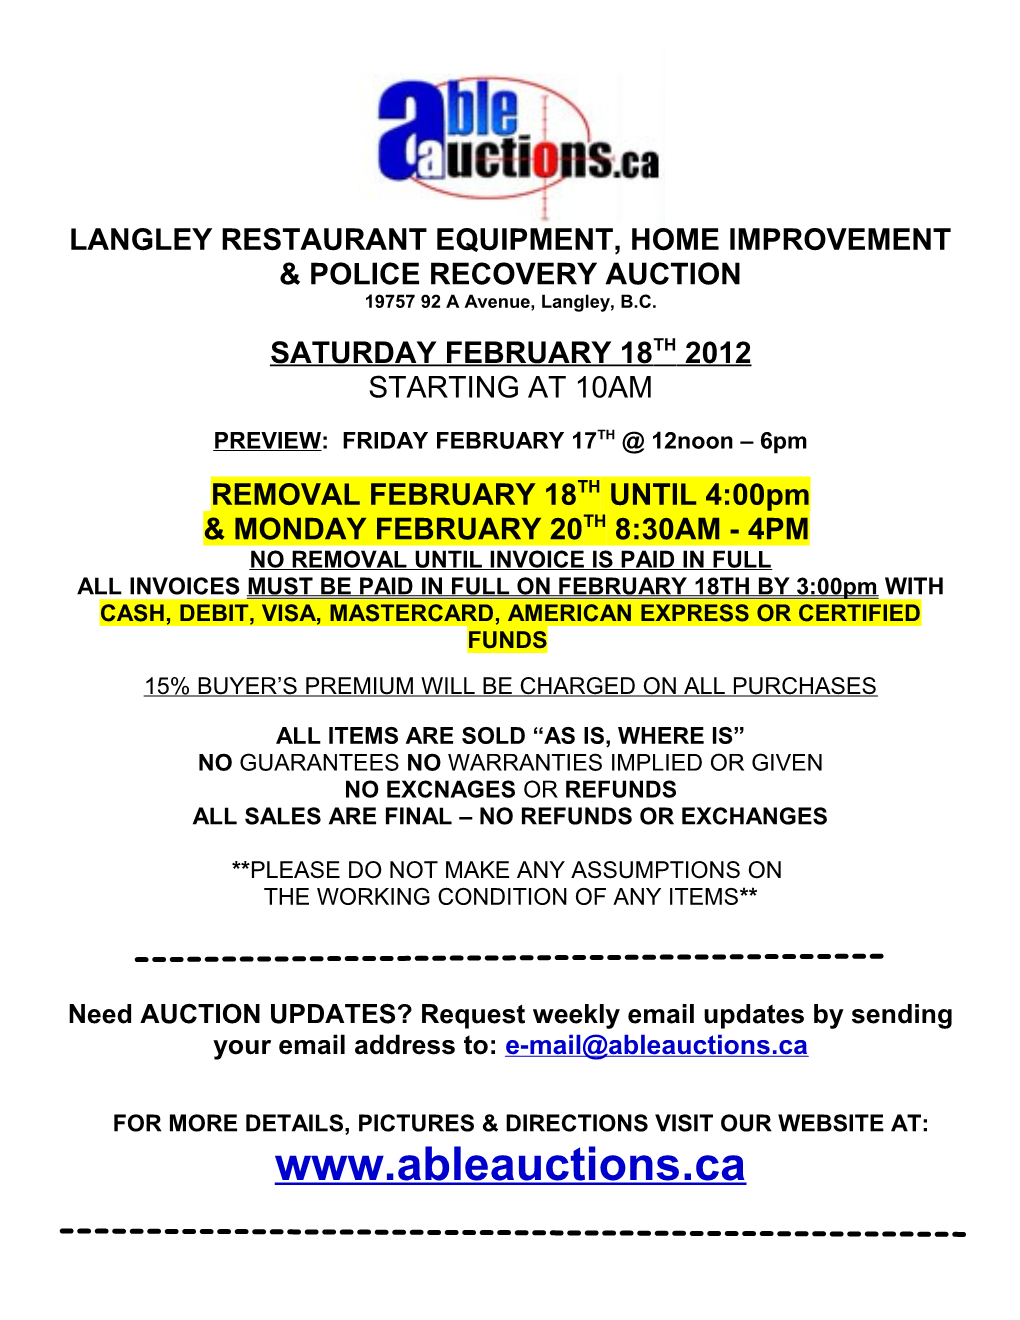 Langley Restaurant Equipment, Home Improvement & Police Recoveryauction